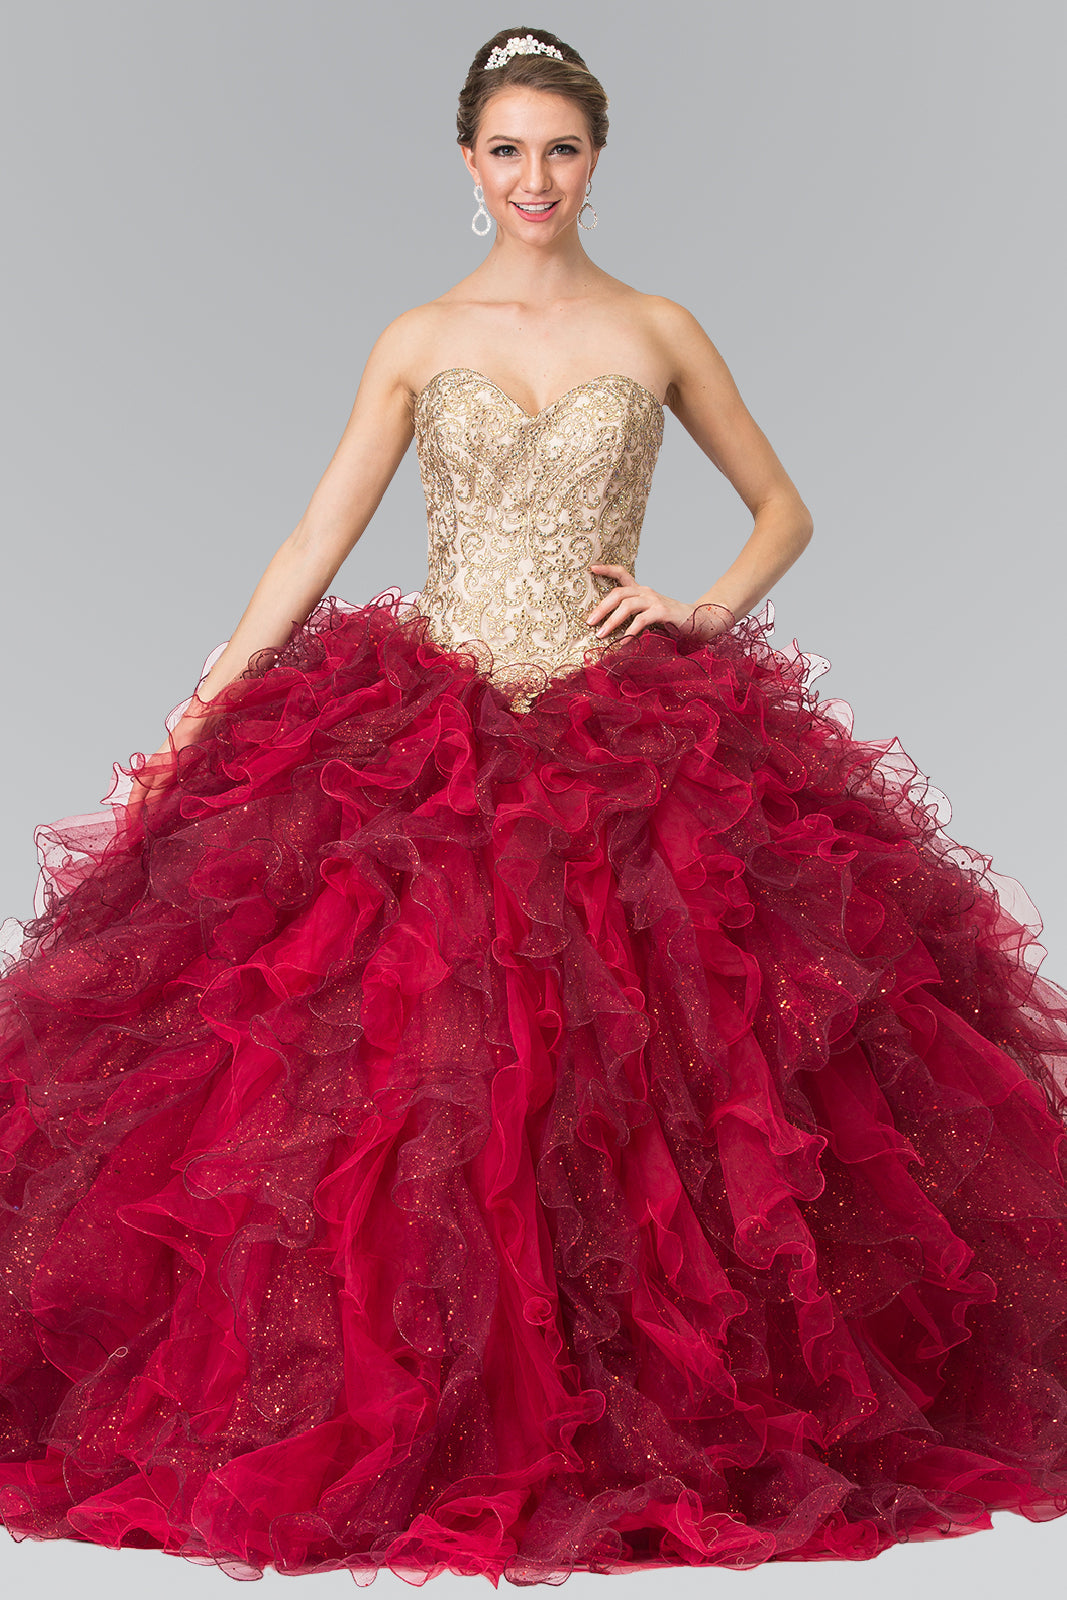 Beads Embellished Embroidery Tulle Ruffled Quinceanera Dress with Bolero
 GLGL2211 Elsy Style QUINCEANERA